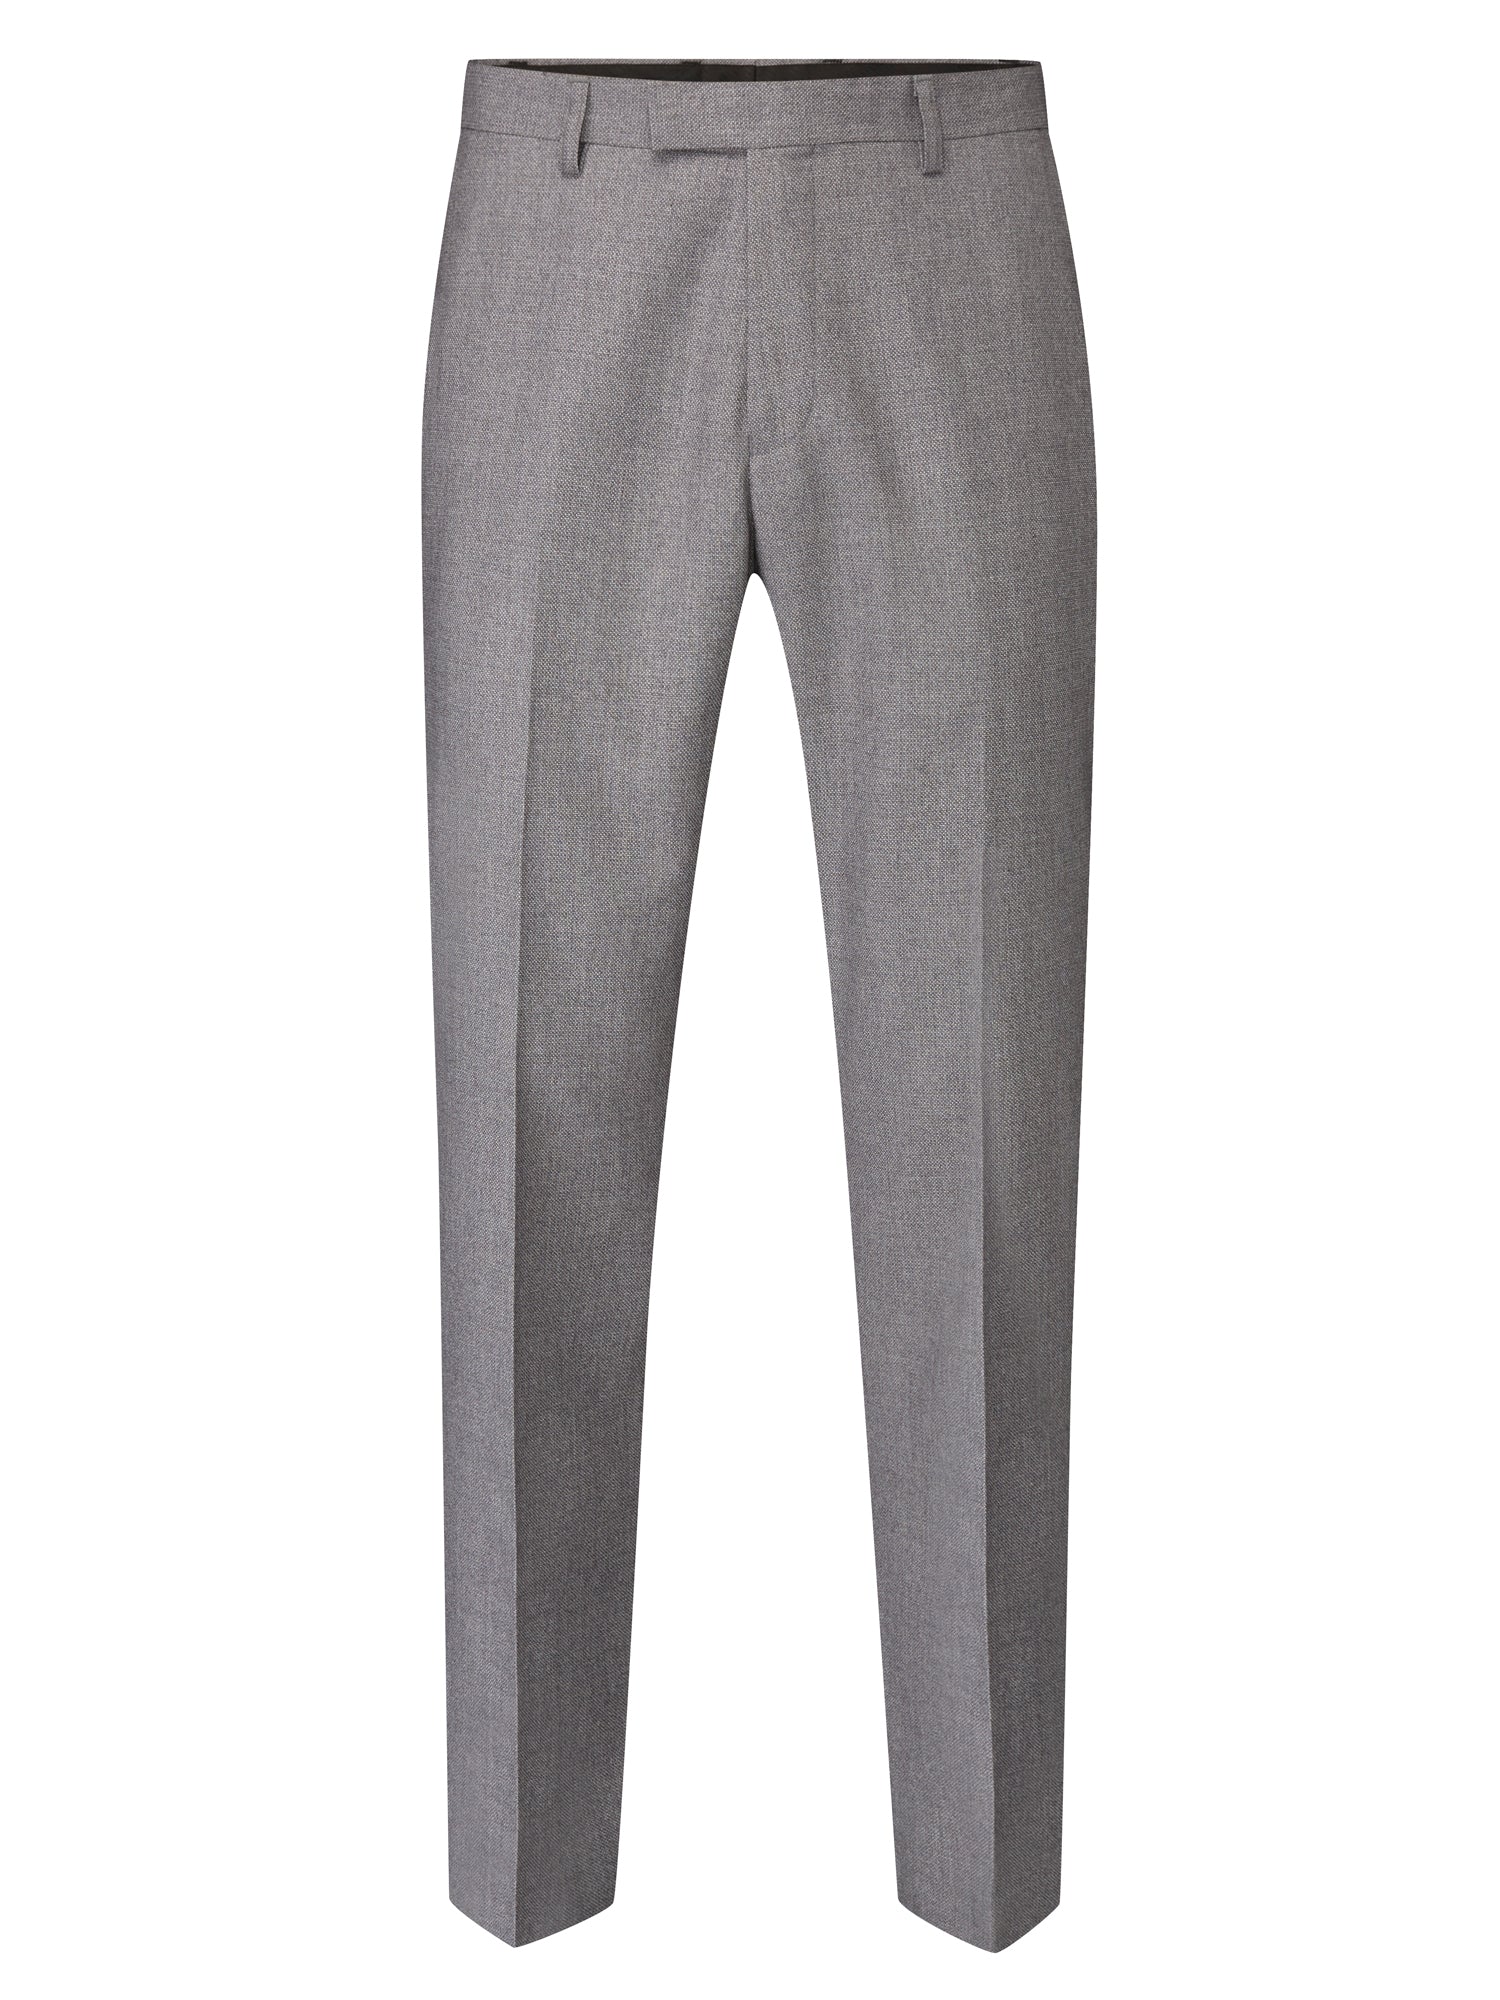 Harcourt Silver Tapered Trousers - Spirit Clothing